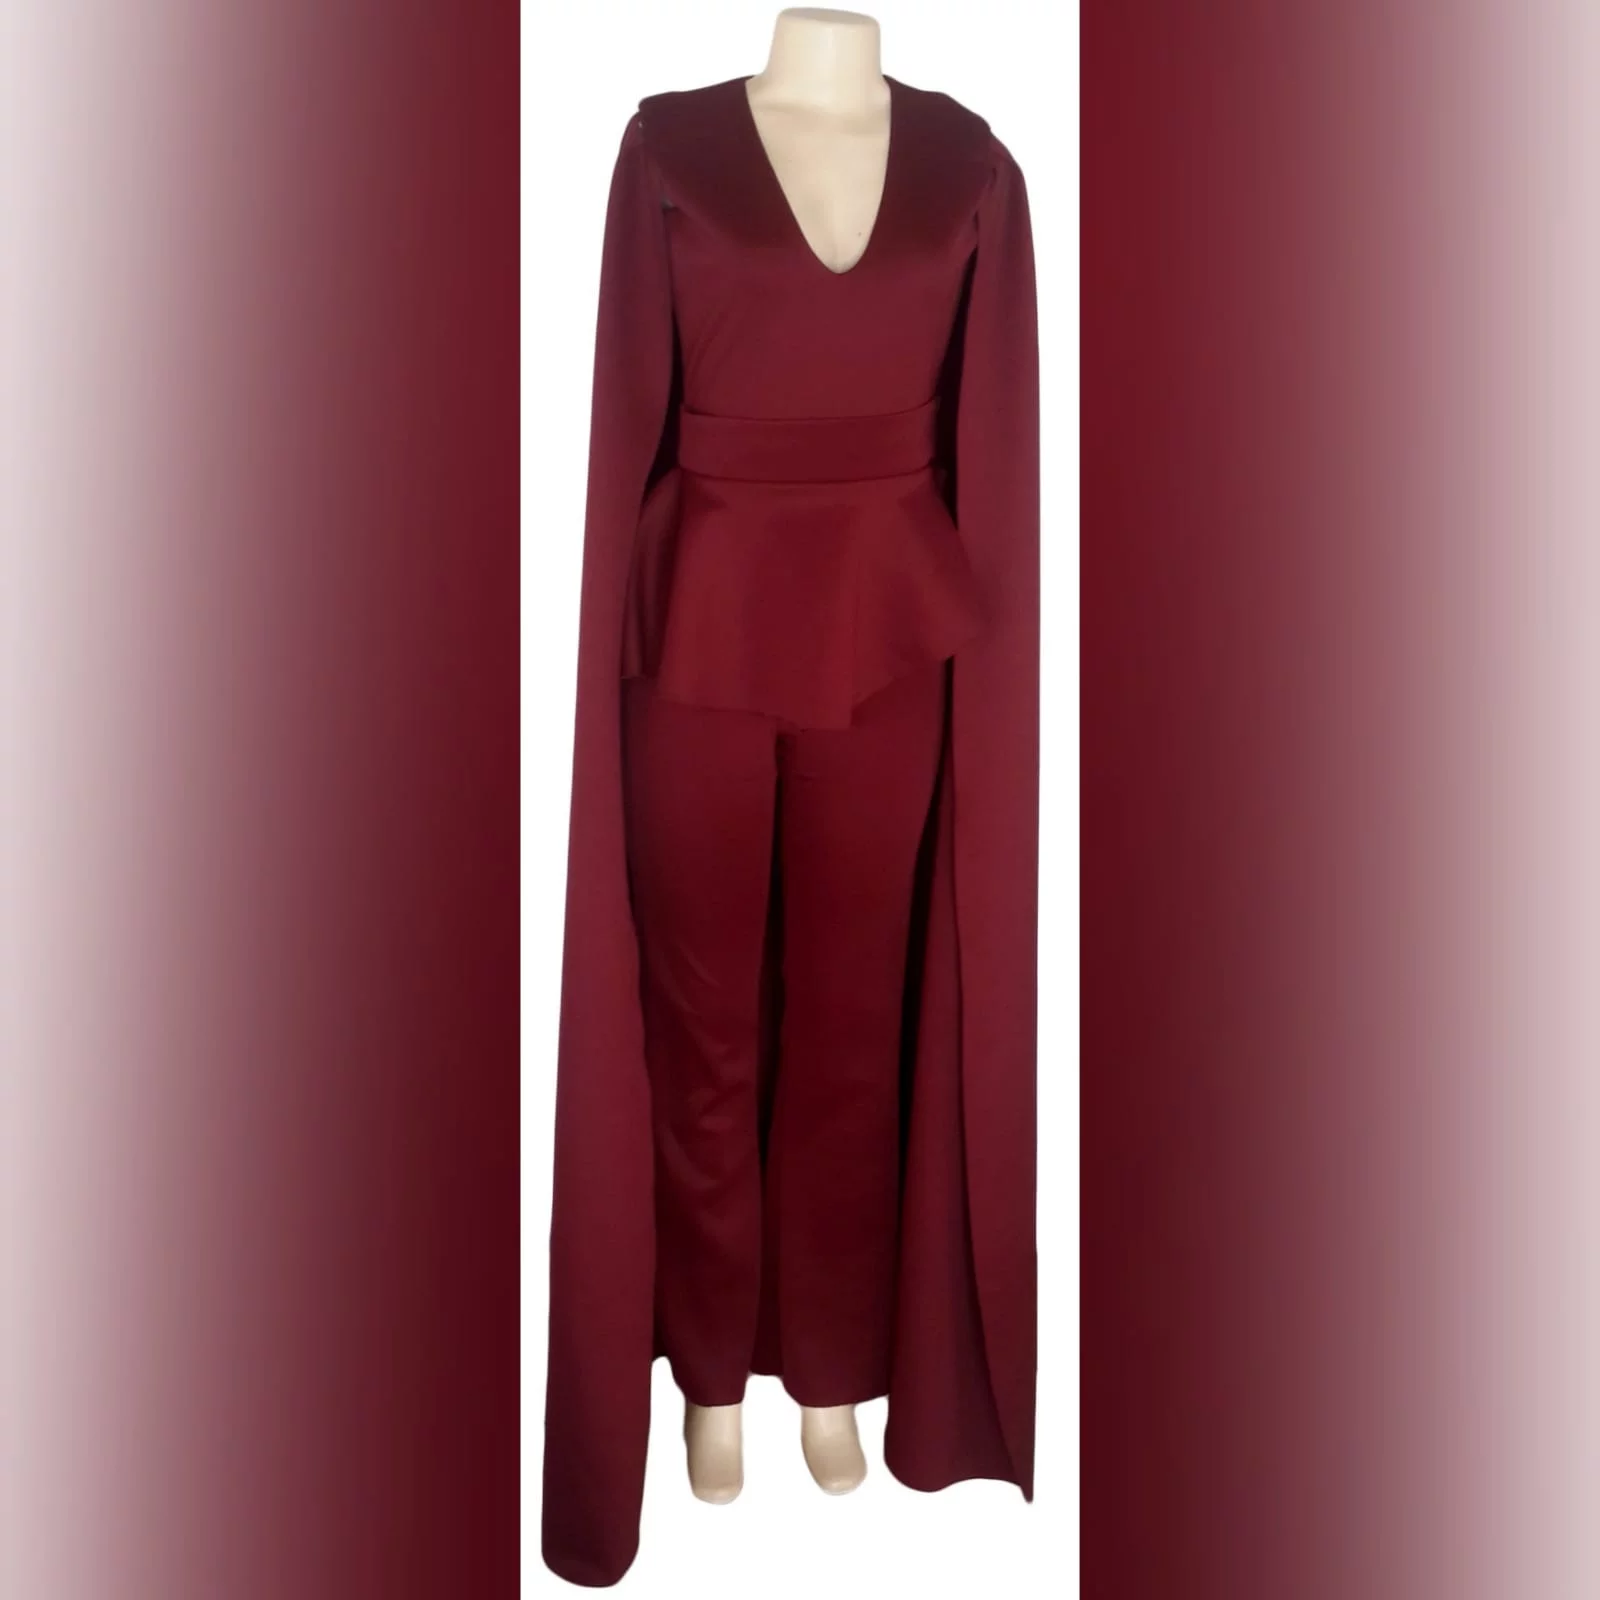 3 piece burgundy evening outfit 4 3 piece burgundy evening outfit. Bodysuit with a v neckline, with a removable peplum belt. With a removable shoulder cape